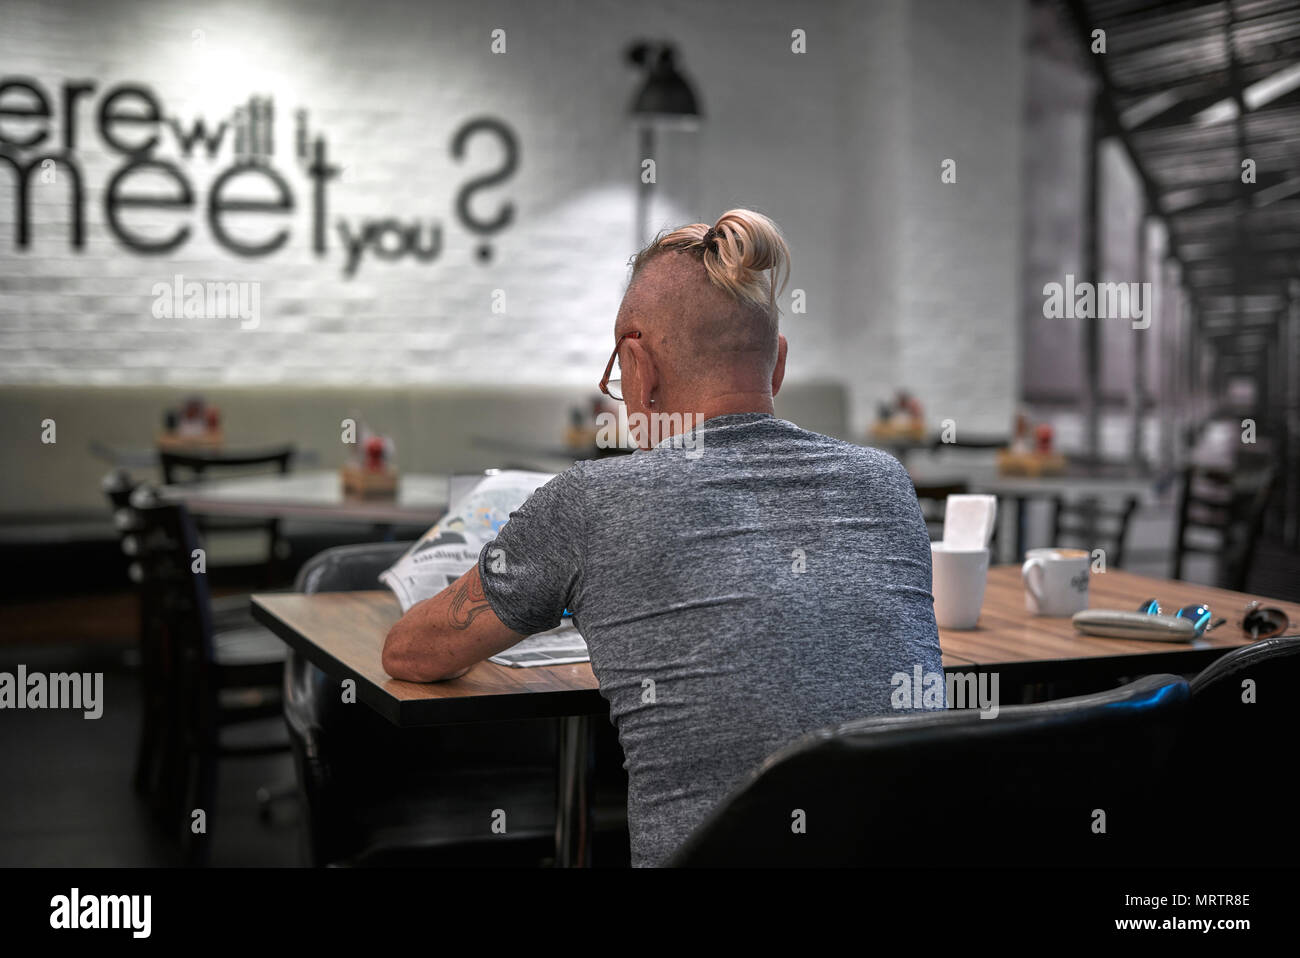 Man sporting top knot with shaven head and tied up ponytail hairstyle. Stock Photo